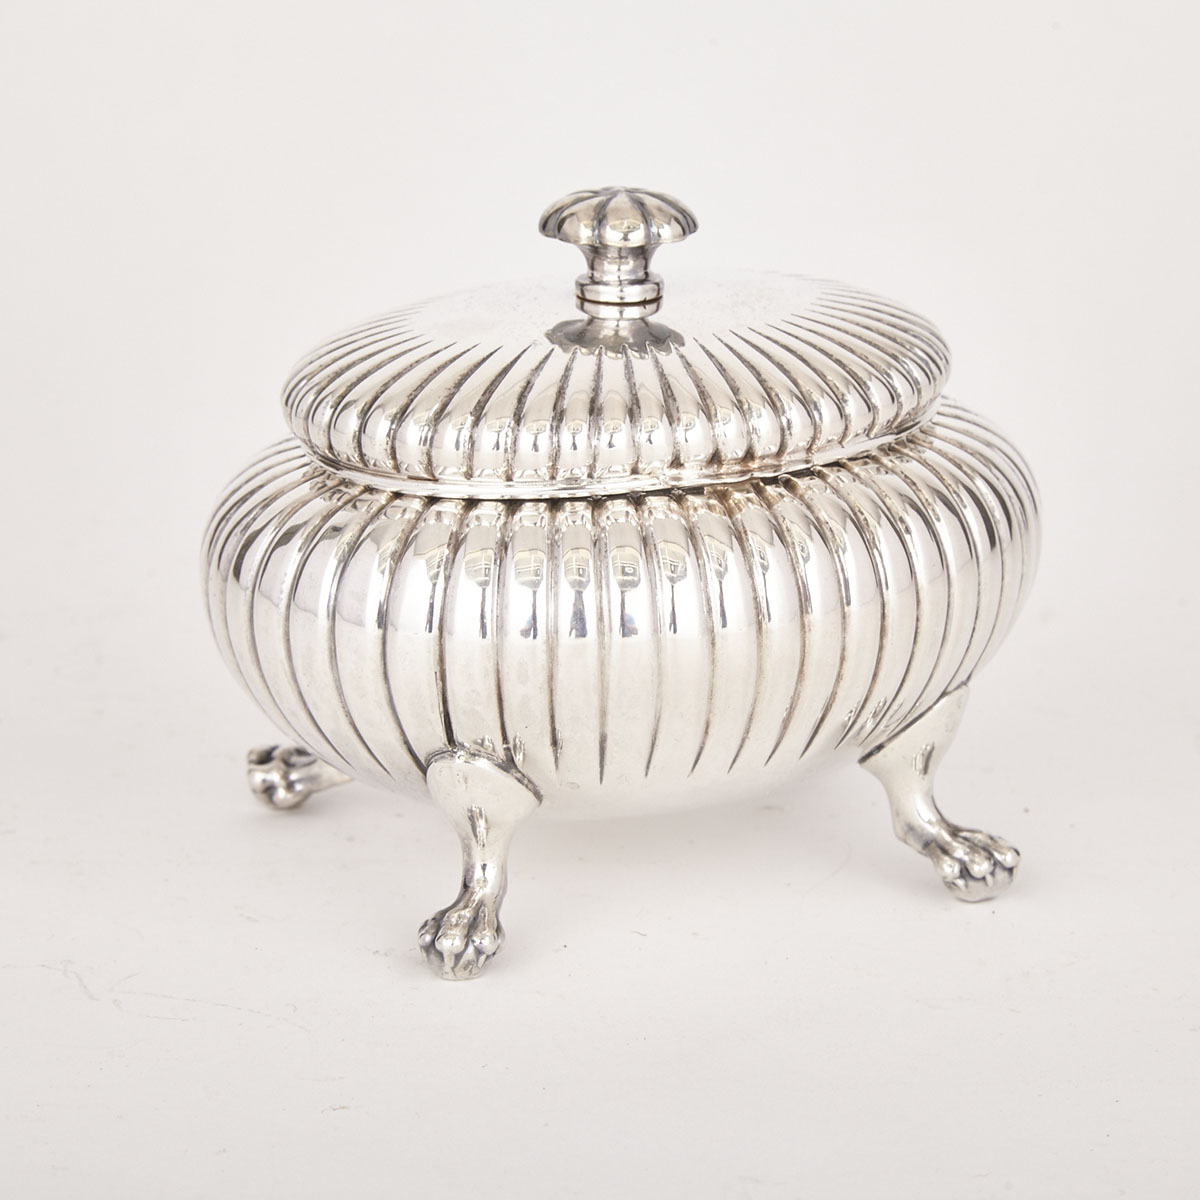 German Silver Fluted Oval Sugar Box, early 20th century